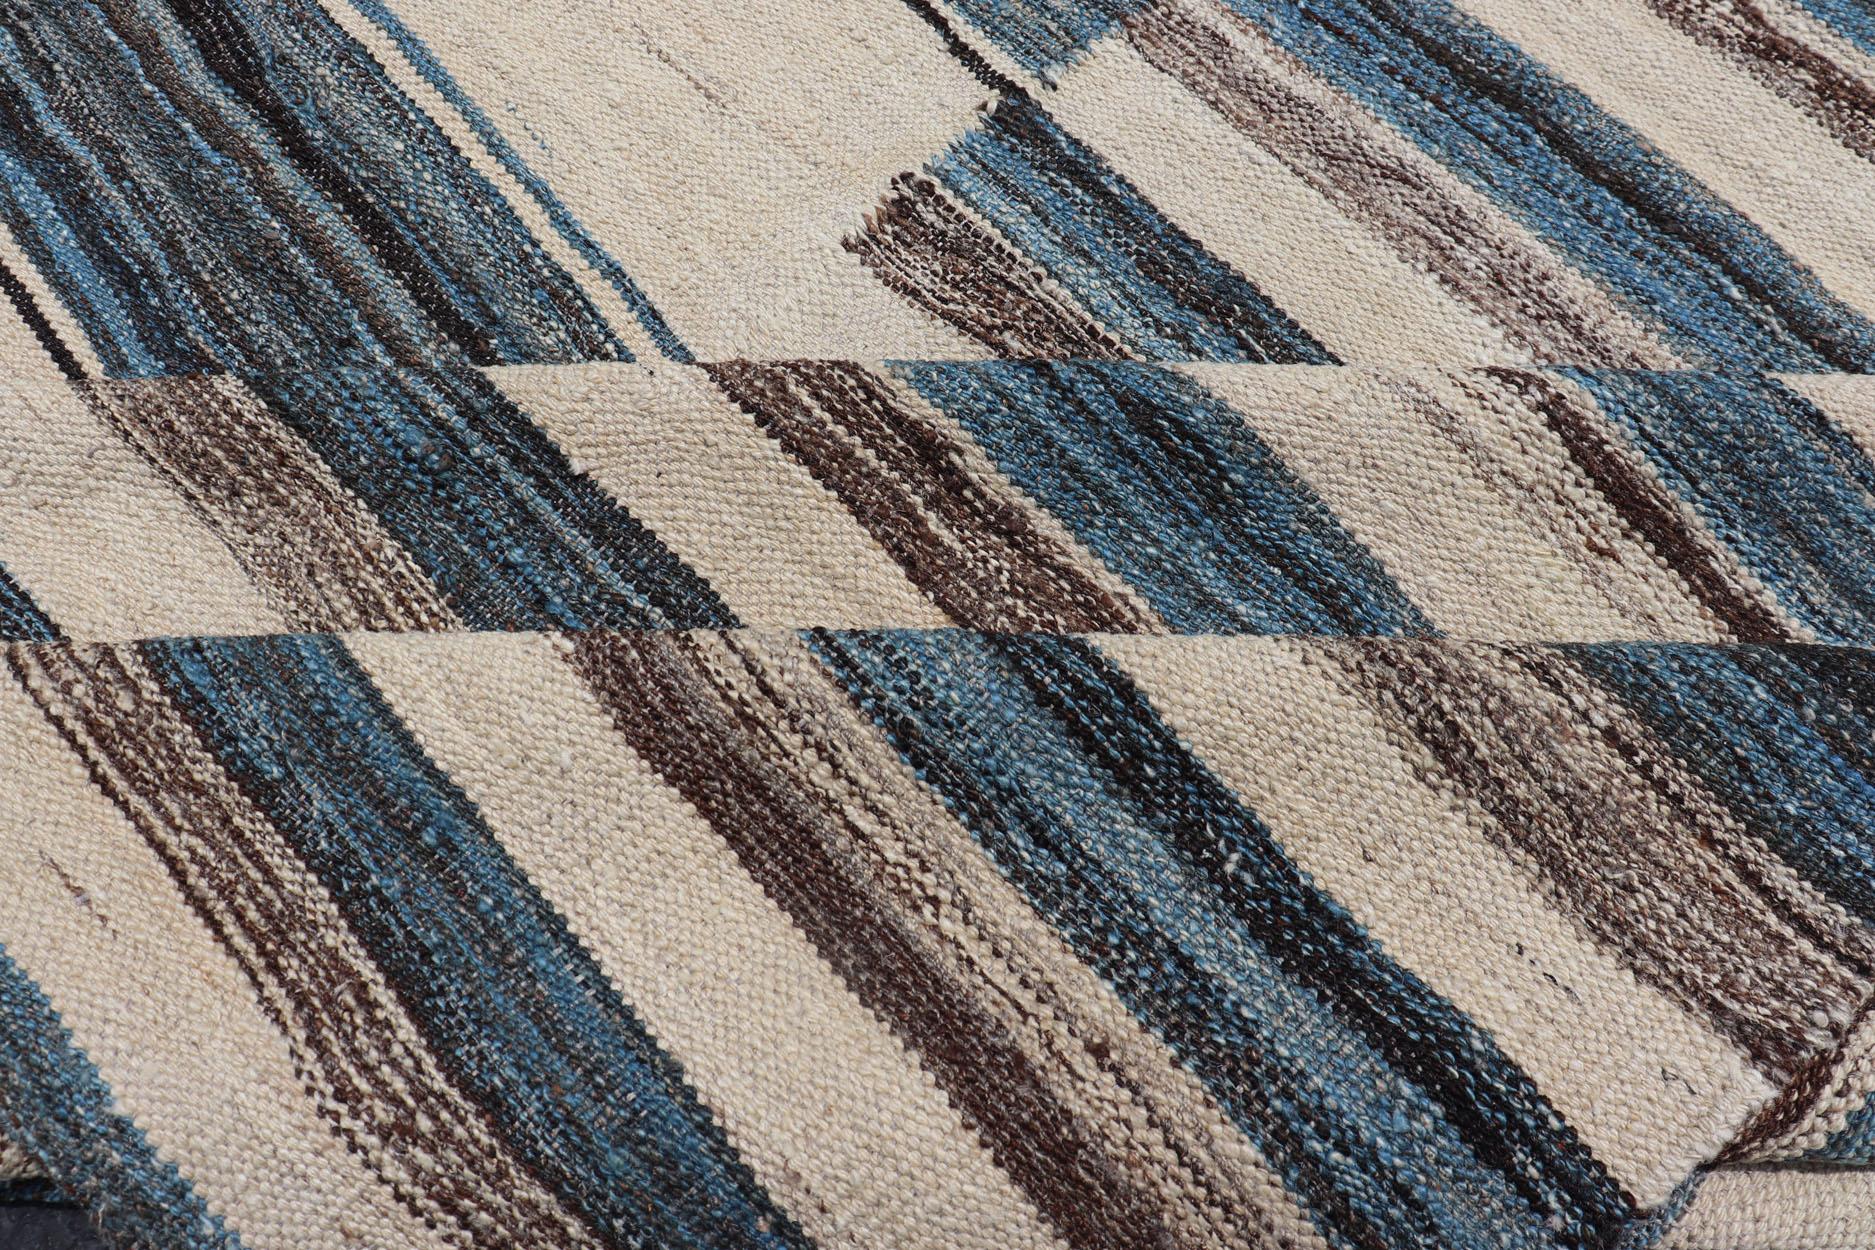 Sqaure Flat-Weave Kilim Rug with Classic Stripe Design in Blue, Cream, Brown For Sale 2